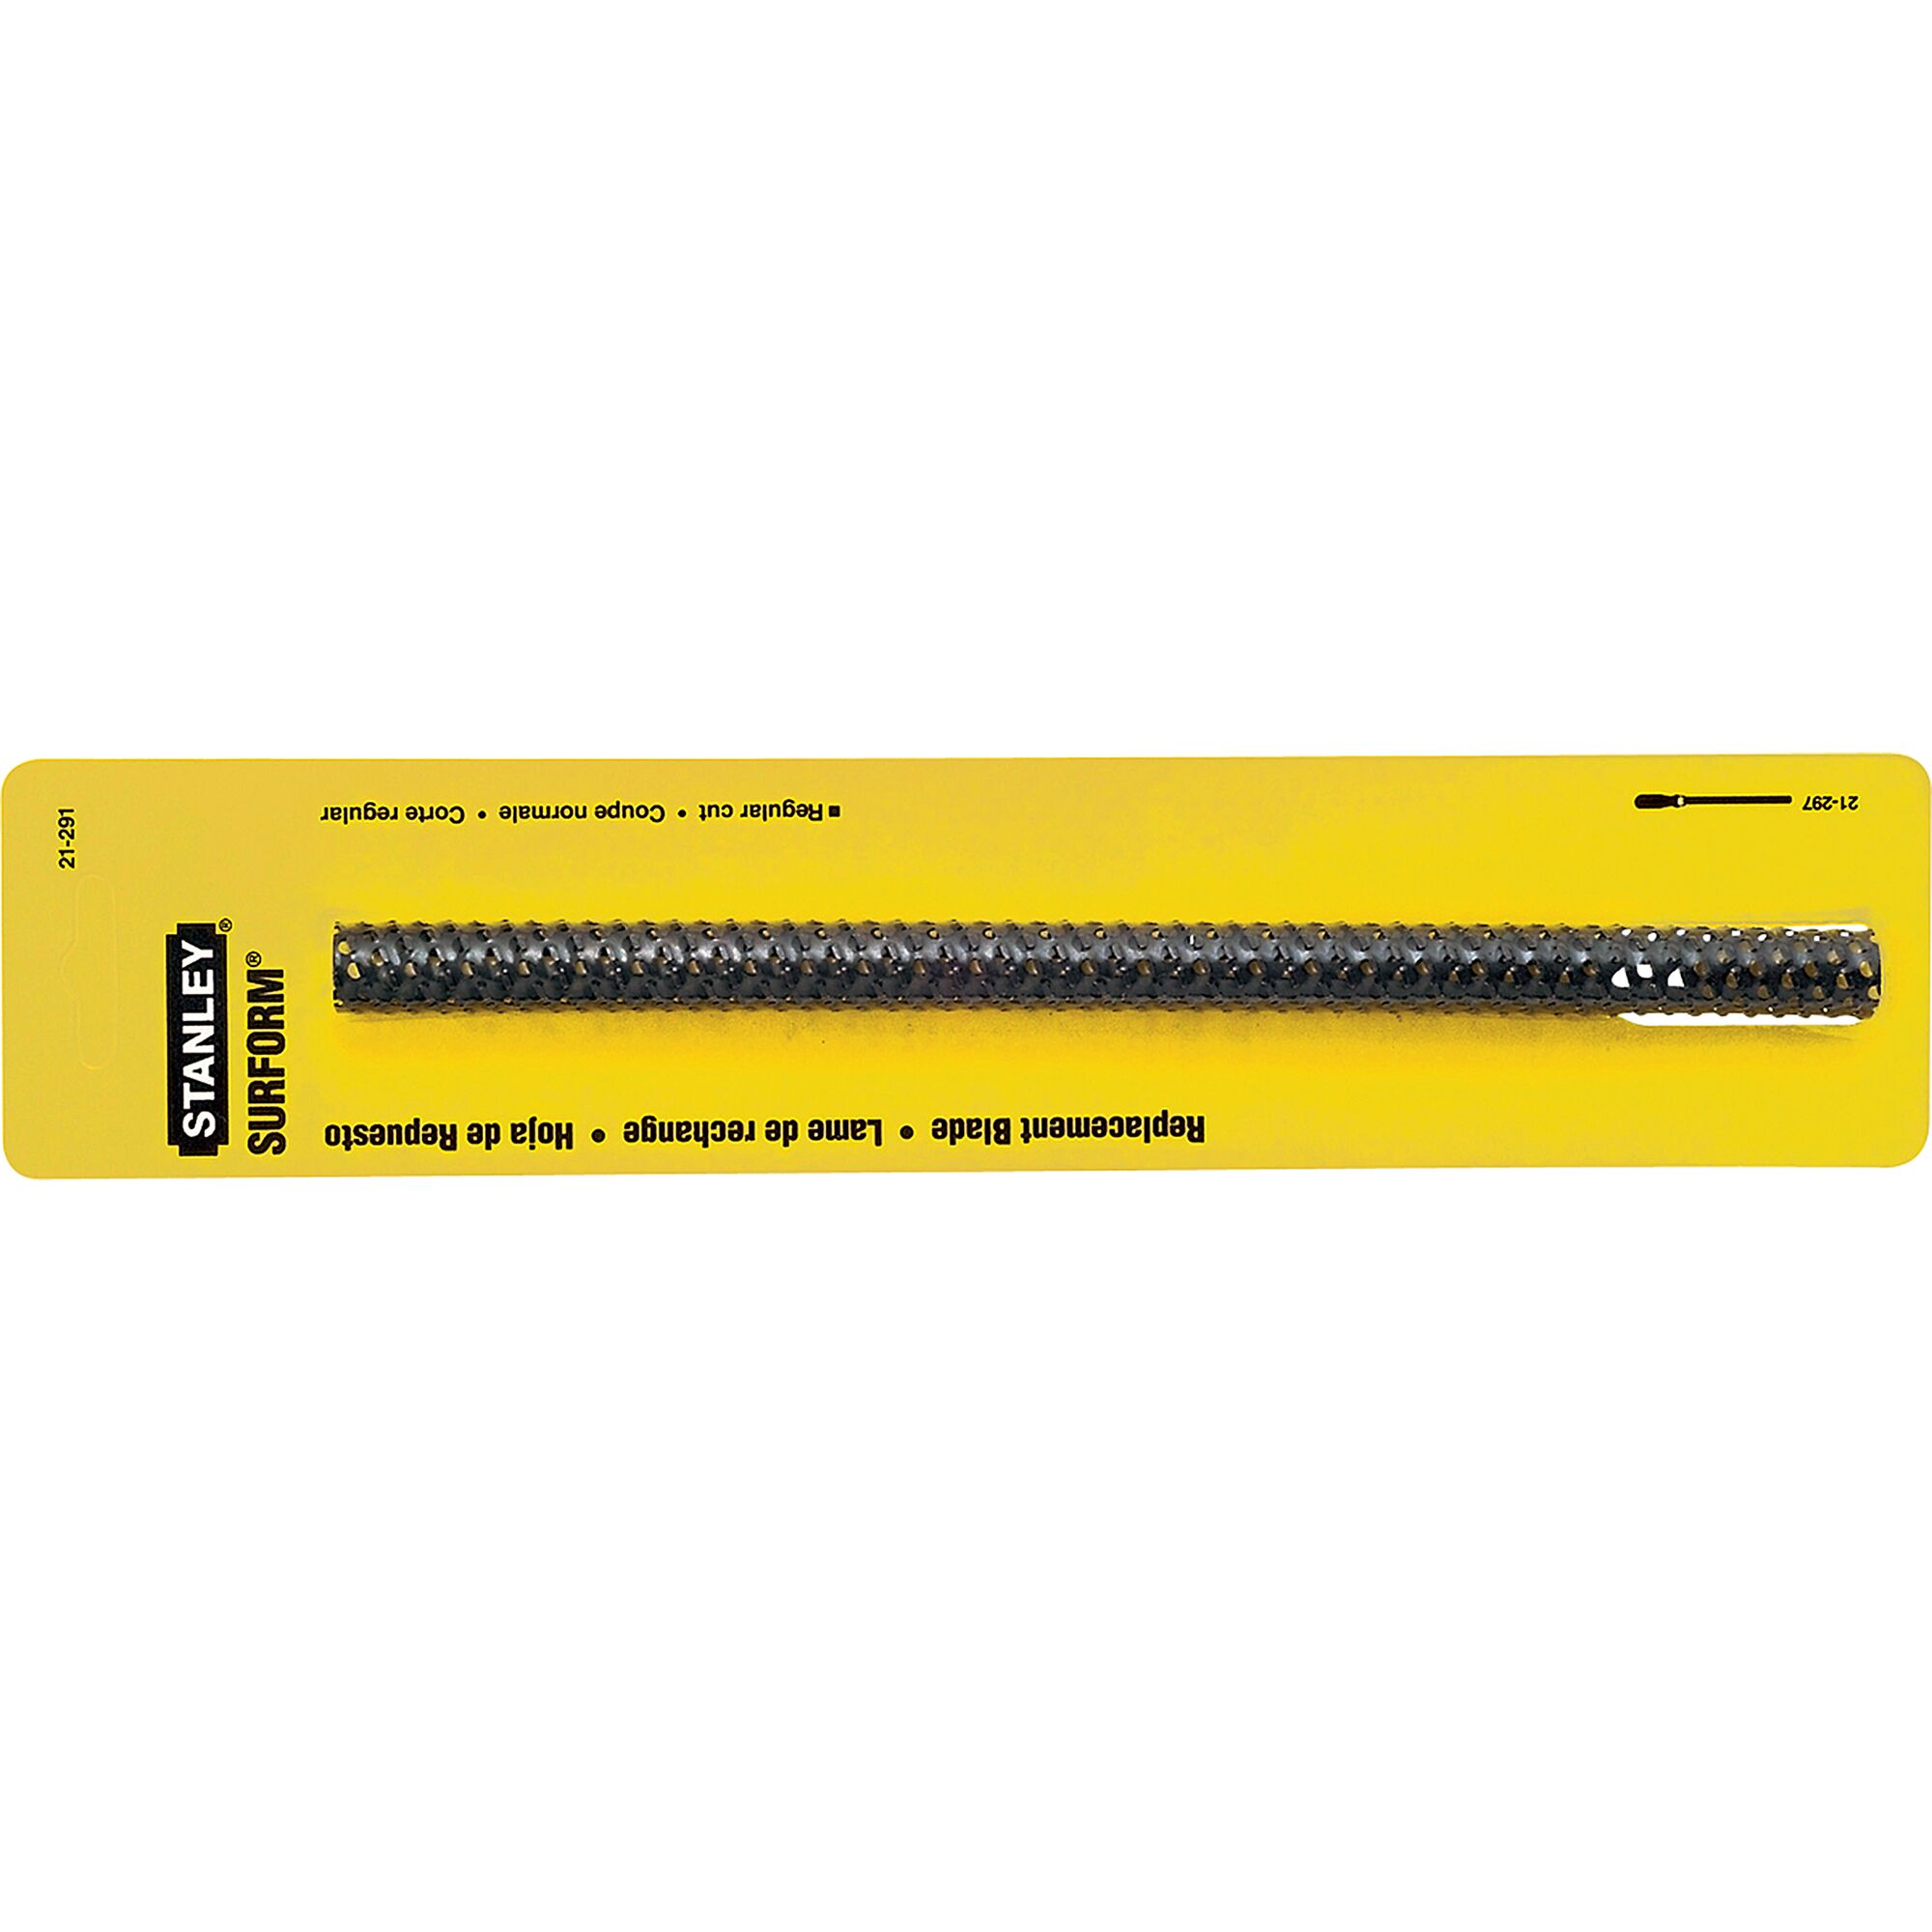 Surform File Replacement Blade No 21-291 Stanley Consumer Tools 3pk for sale online 